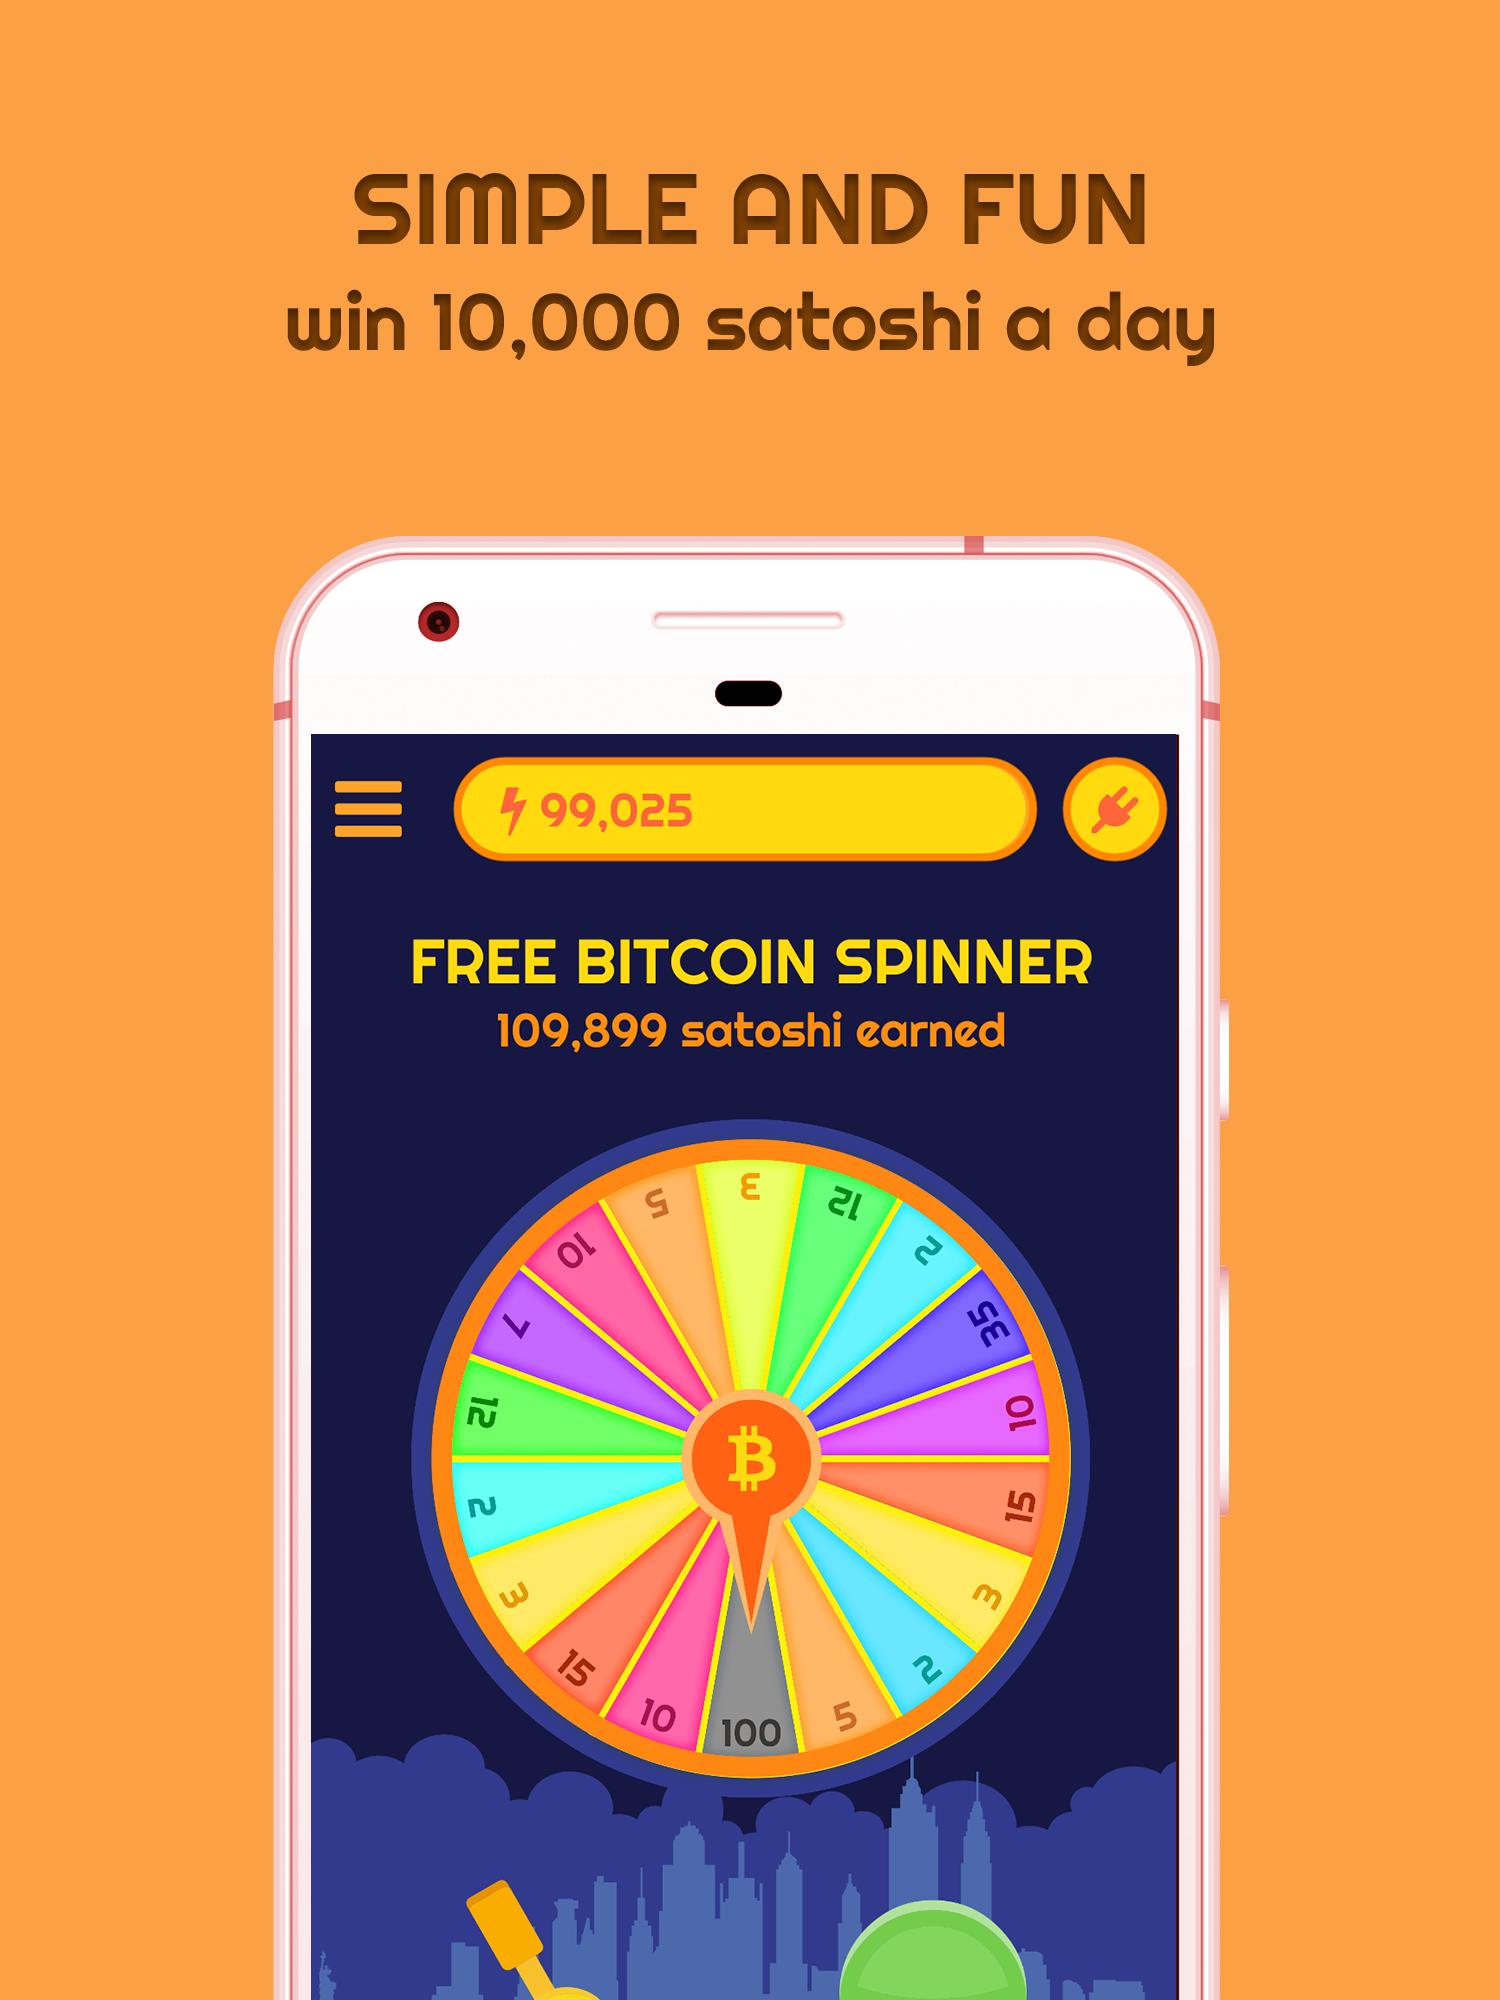 Free Bitcoin Spinner for Android - APK Download